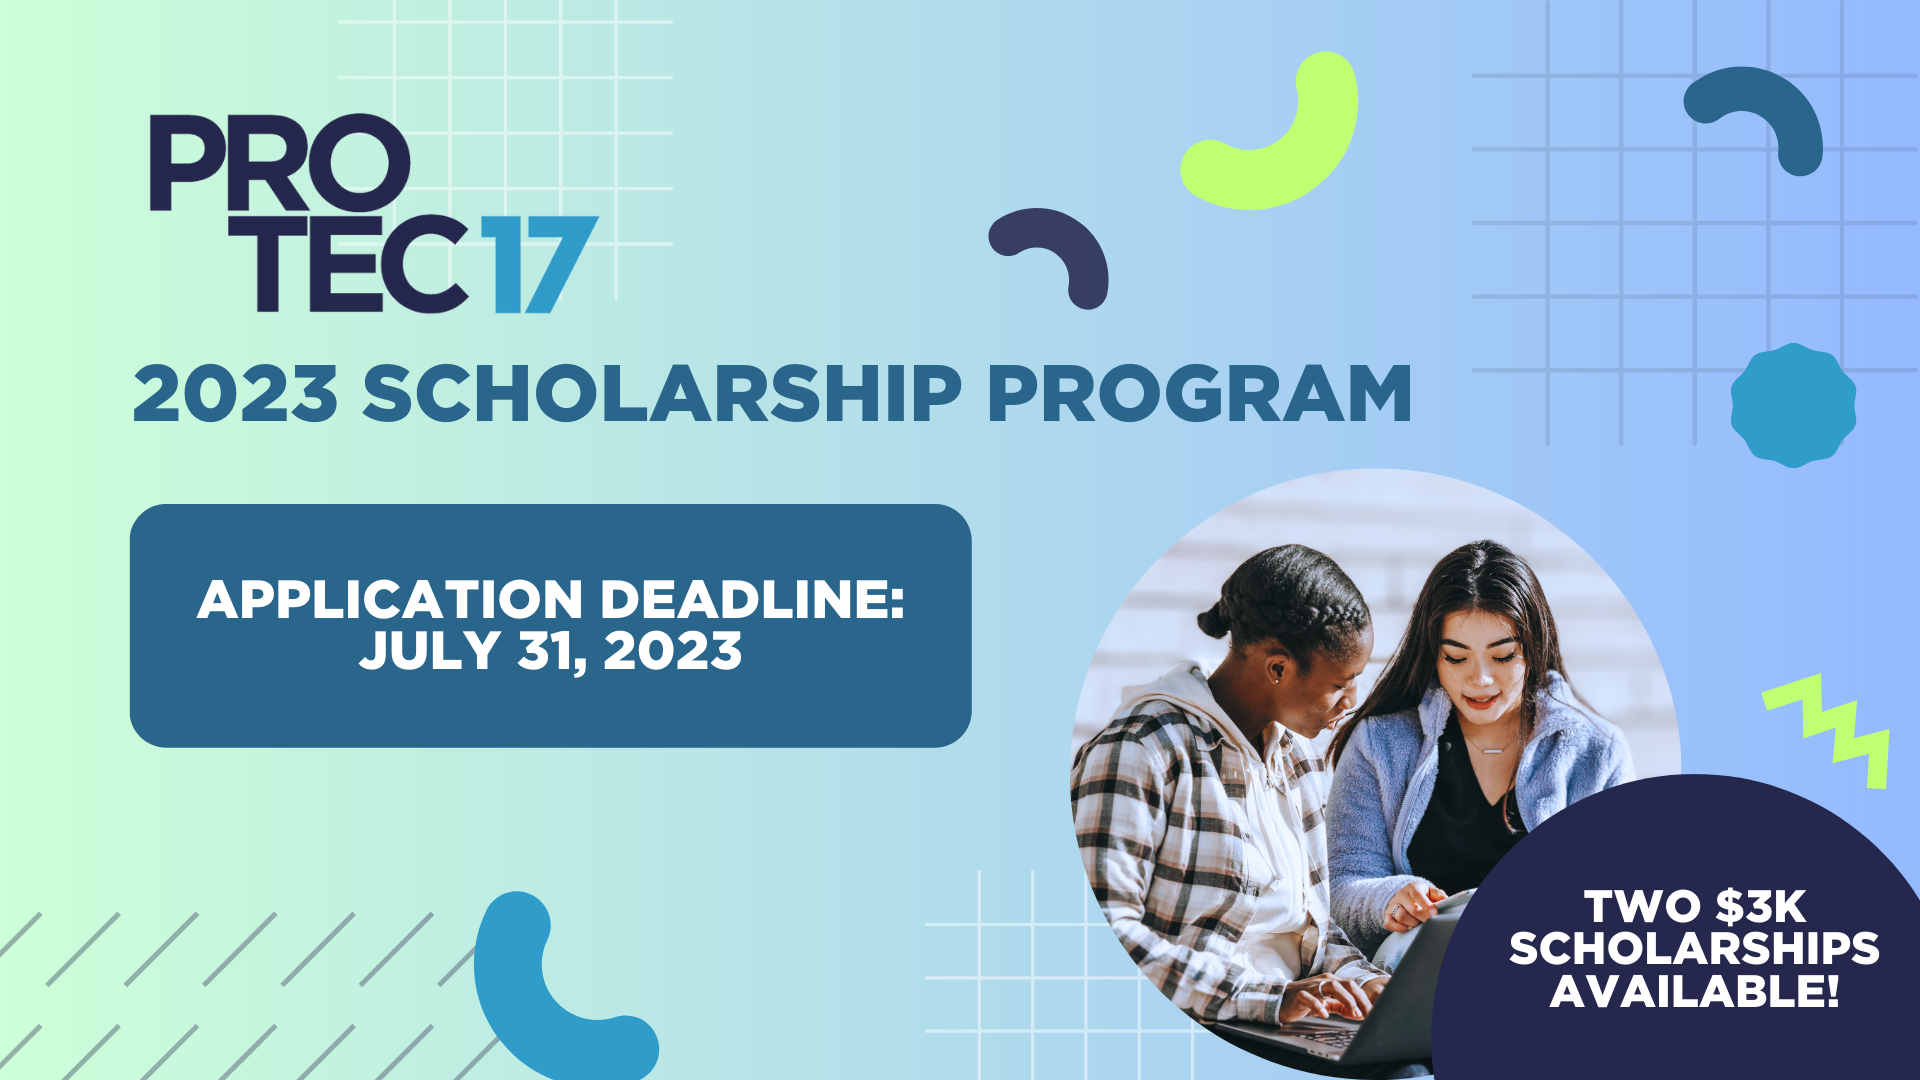 Gradient green and blue image with grid and abstract designs scattered around. The text reads, "PROTEC17 2023 SCHOLARSHIP PROGRAM | APPLICATION DEADLINE: JULY 31, 2023 | TWO $3K SCHOLARSHIPS AVAILABLE!" There is a picture of two students studying together.